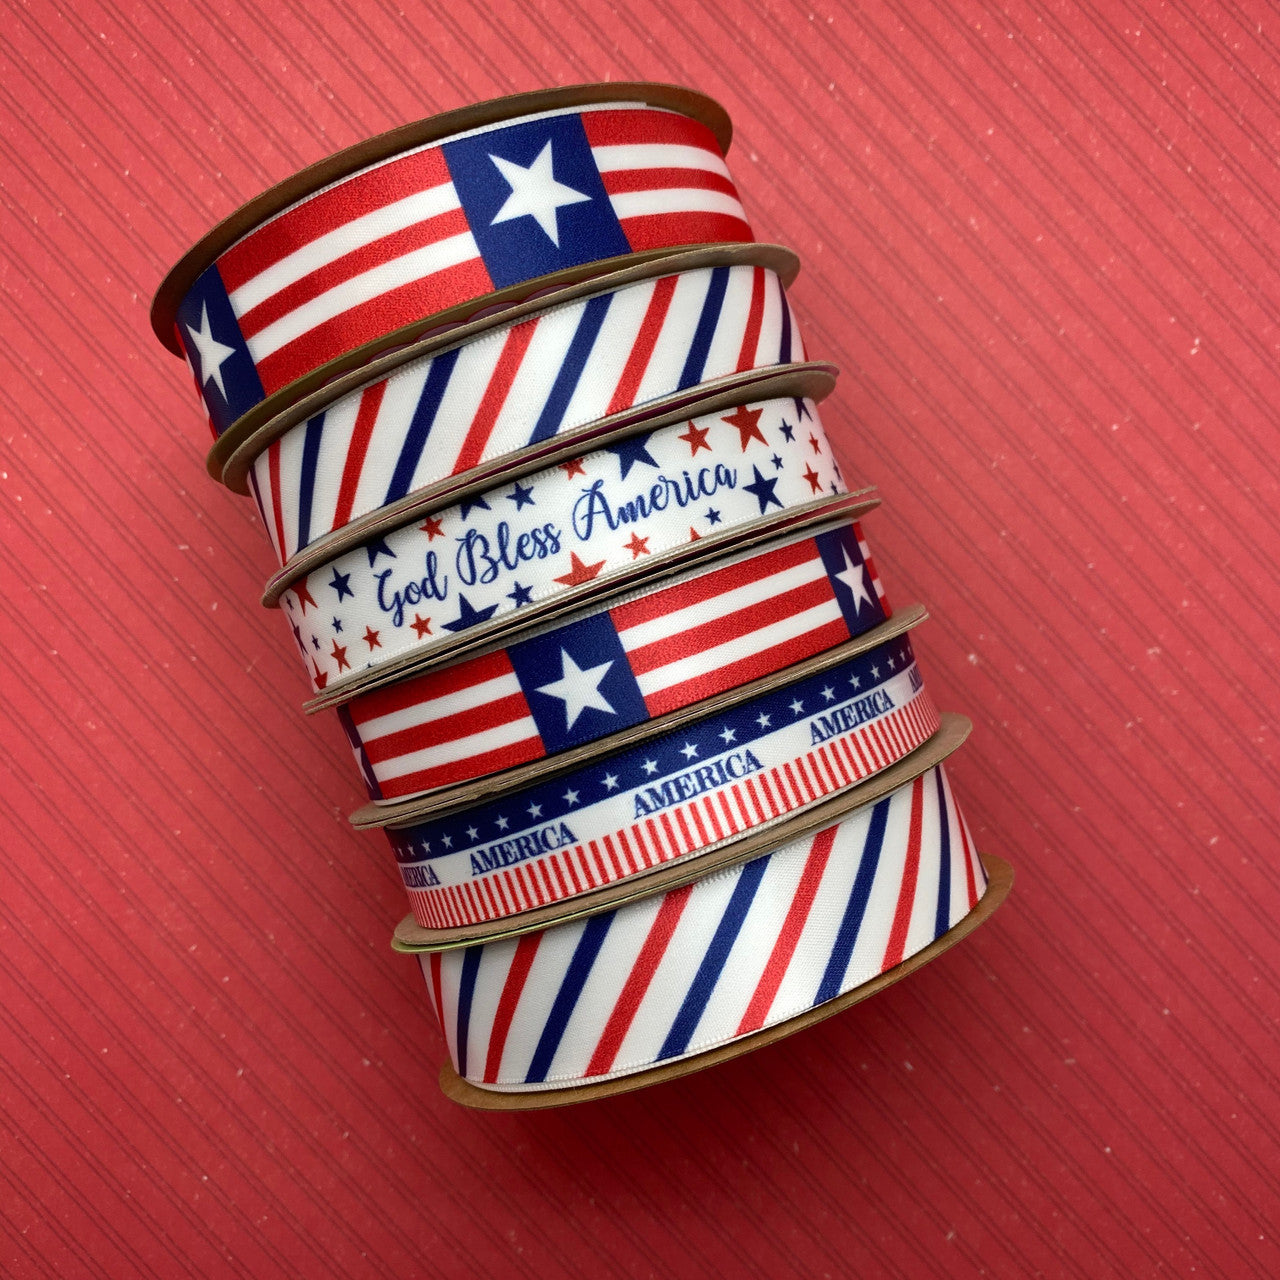 God Bless America ribbon with stars of blue and red printed on 5/8" white single face satin